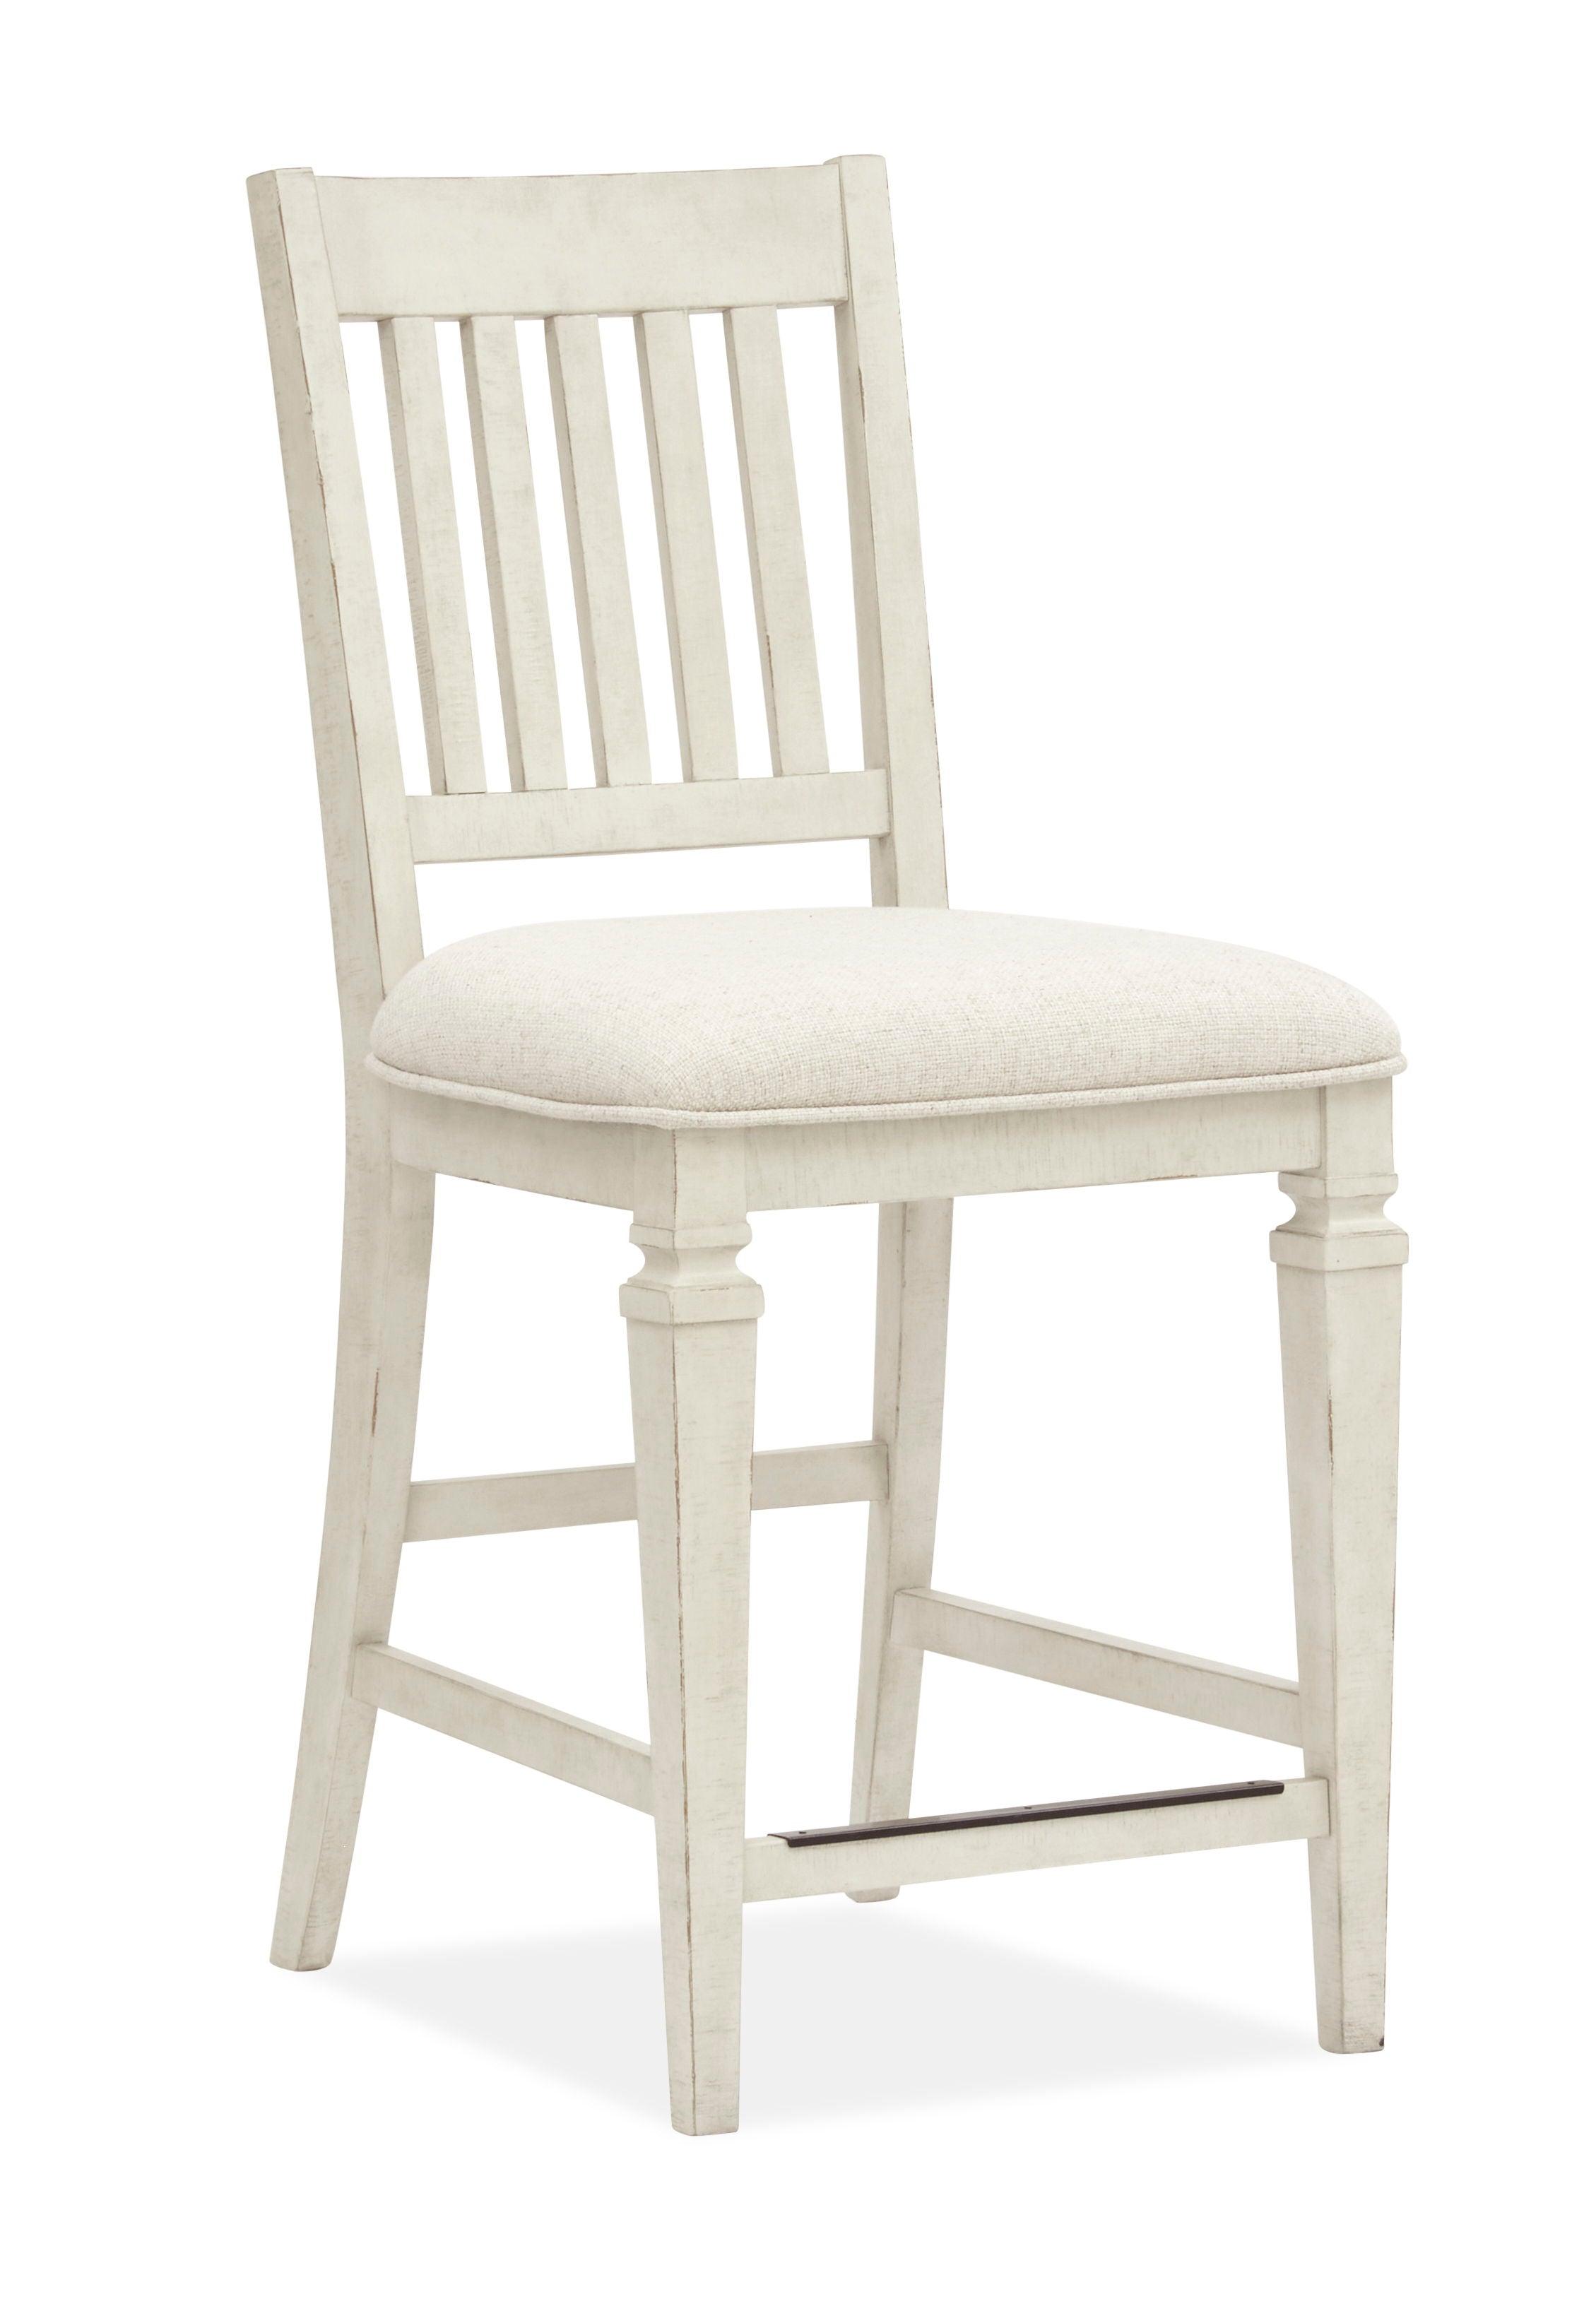 Magnussen Furniture - Newport - Counter Dining Chair With Upholstered Seat (Set of 2) - Alabaster - 5th Avenue Furniture